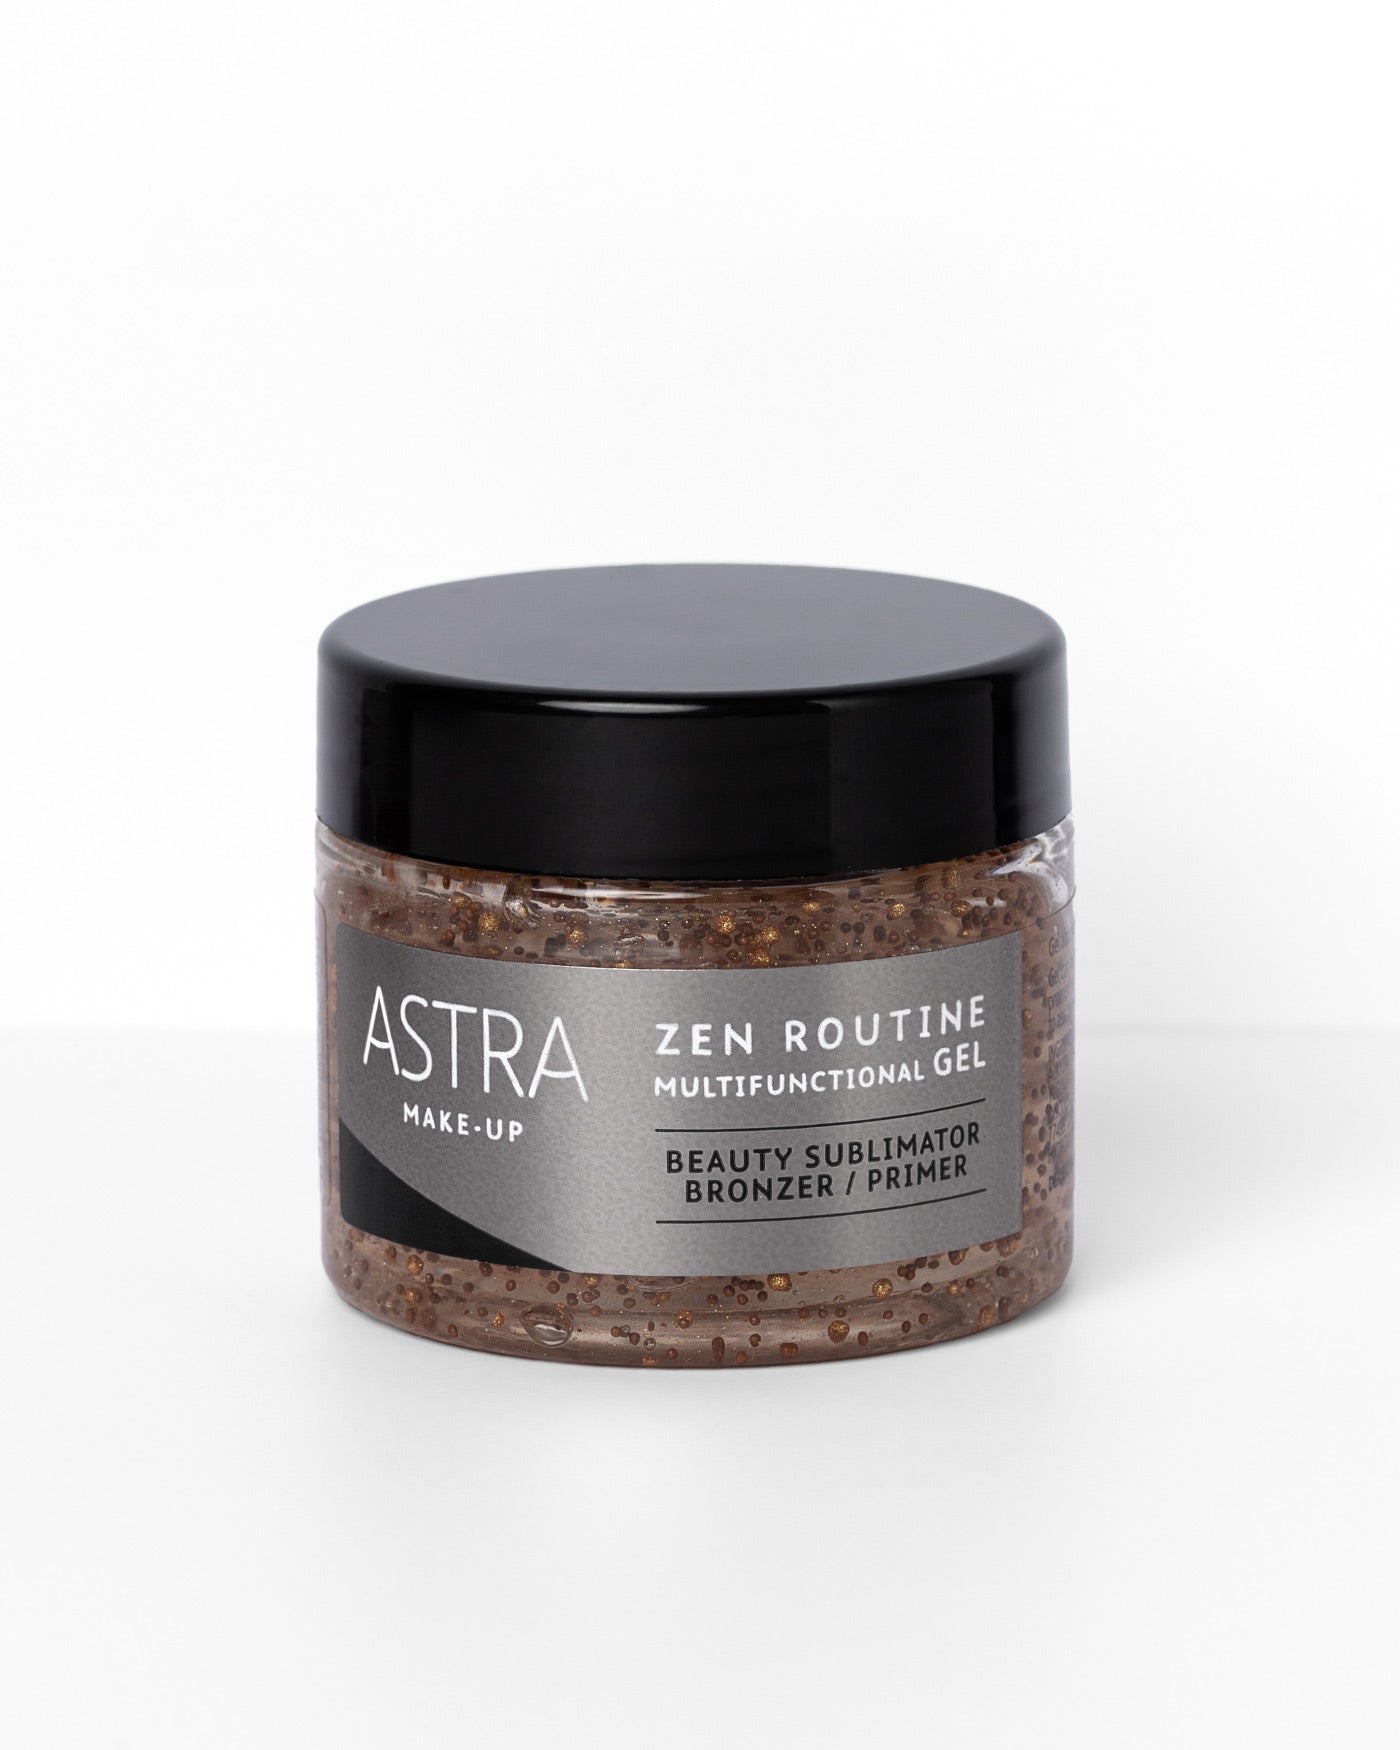 ZEN ROUTINE MULTIFUNCTIONAL GEL - All Products - Astra Make-Up